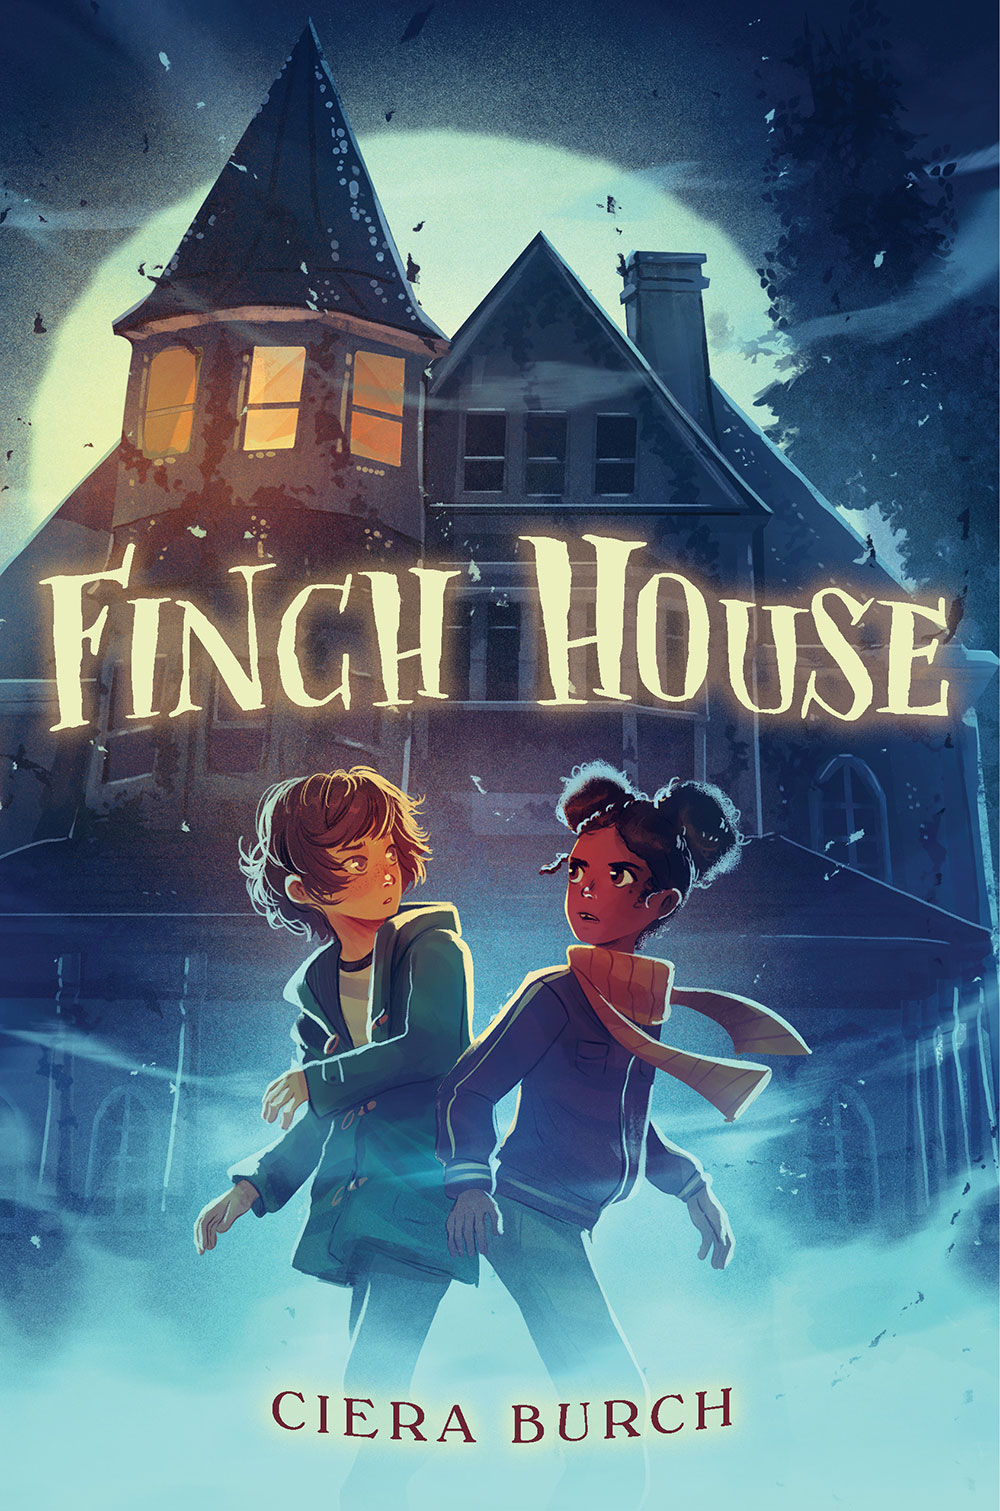 Book cover for Finch House by Ciera Burch